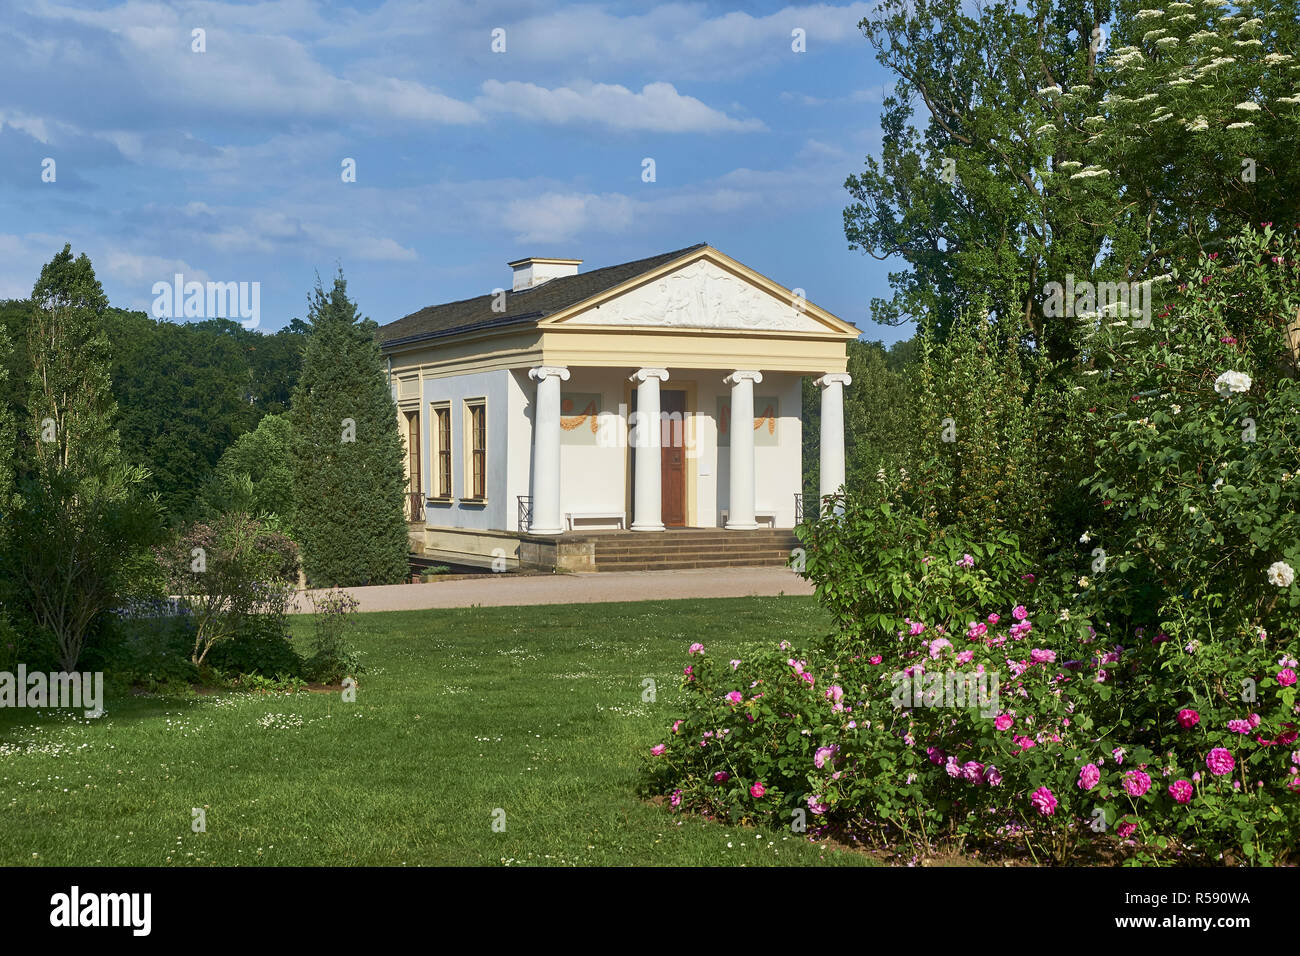 Roman house in the park at the Ilm, Weimar, Thuringia, Germany Stock Photo